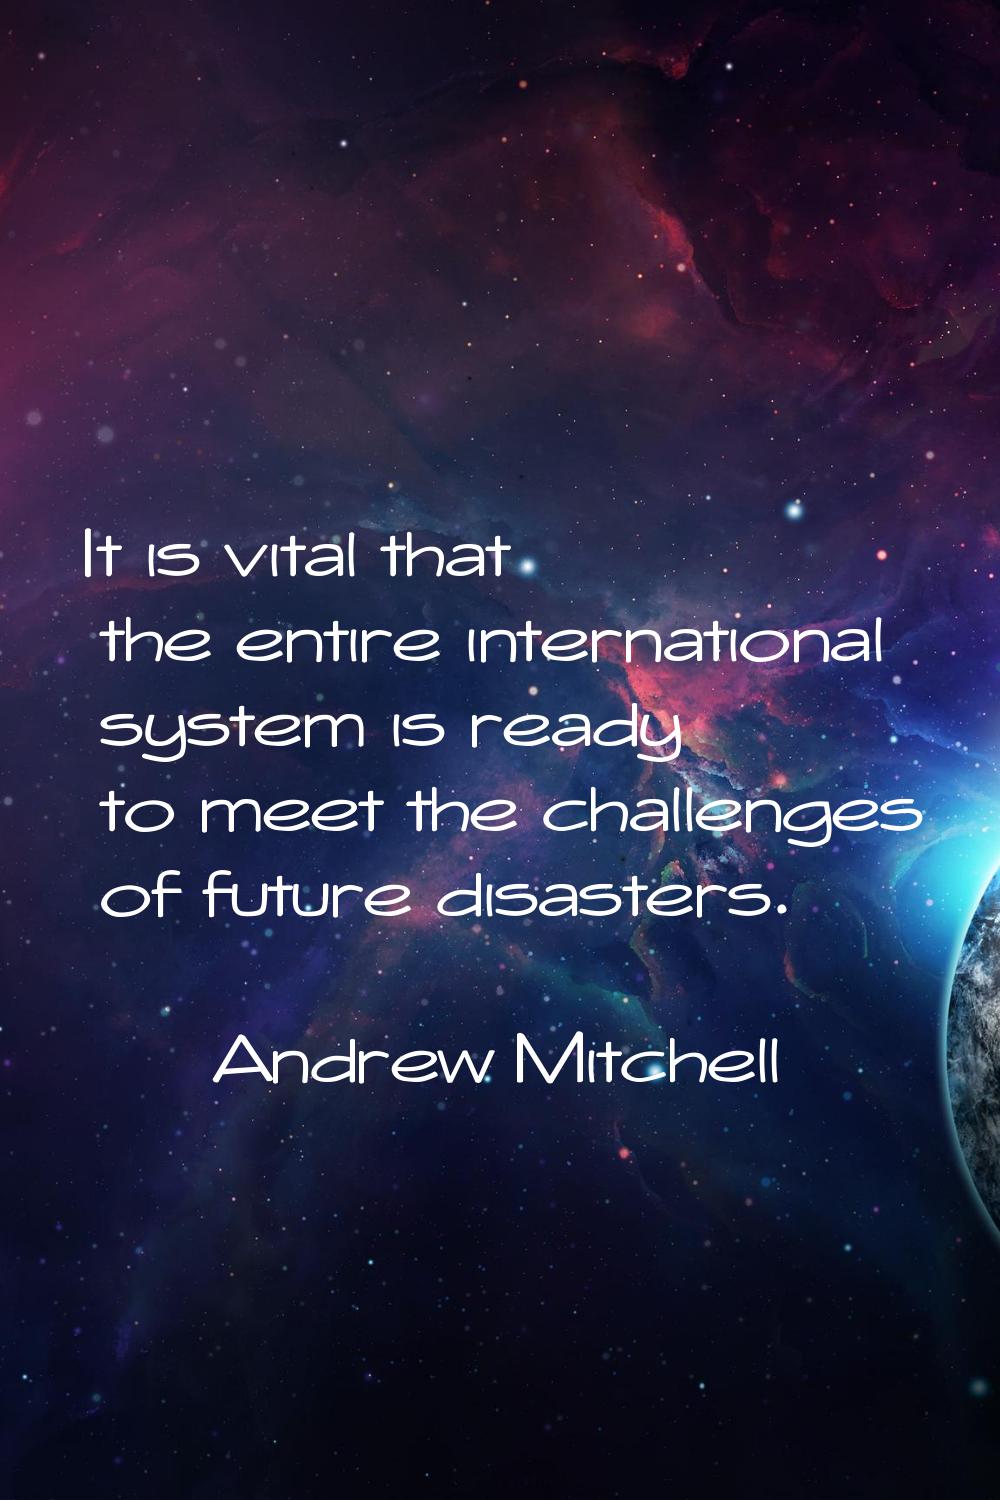 It is vital that the entire international system is ready to meet the challenges of future disaster